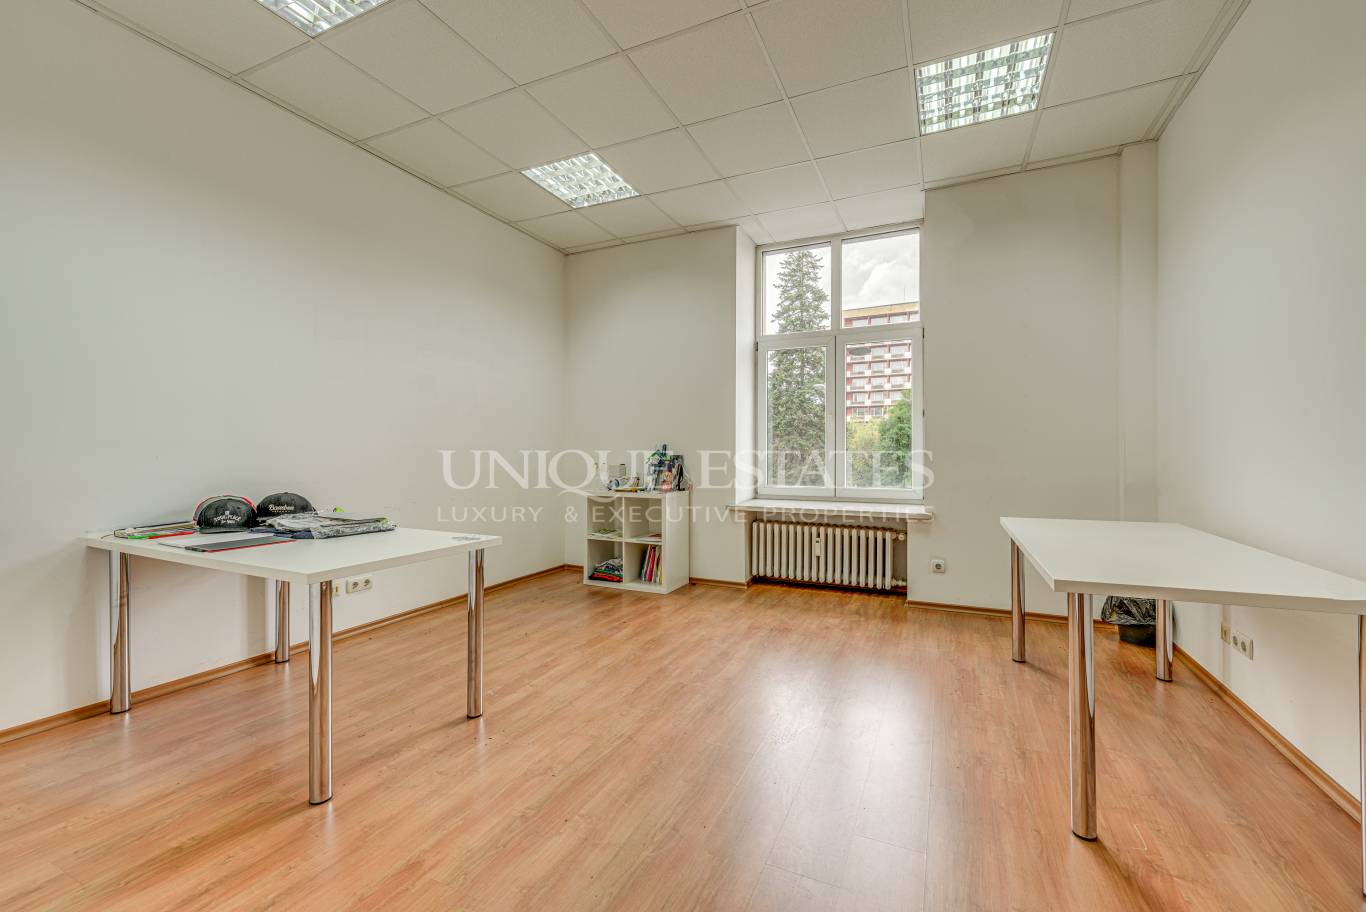 Office for rent in Sofia, Downtown with listing ID: K4831 - image 13